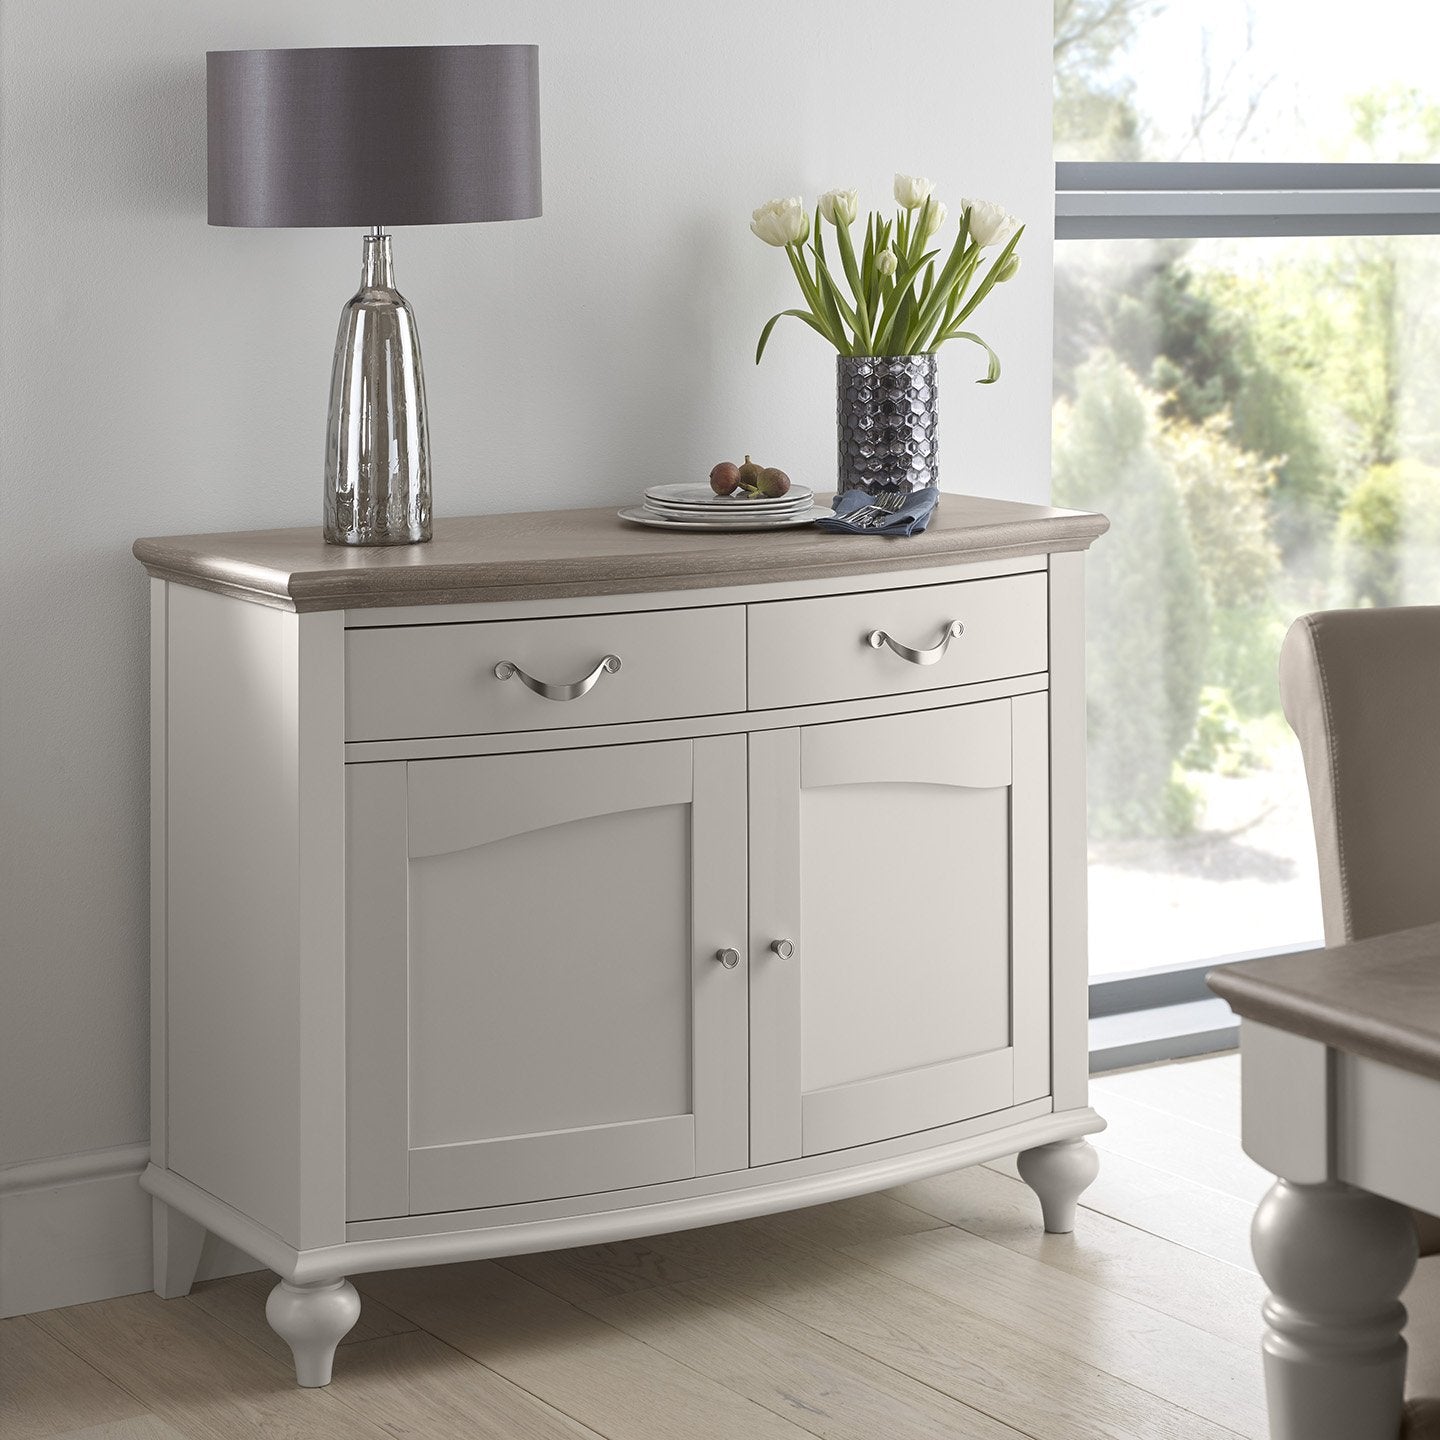 Montreux Small Sideboard - Soft Grey from Upstairs Downstairs Furniture in Lisburn, Monaghan and Enniskillen